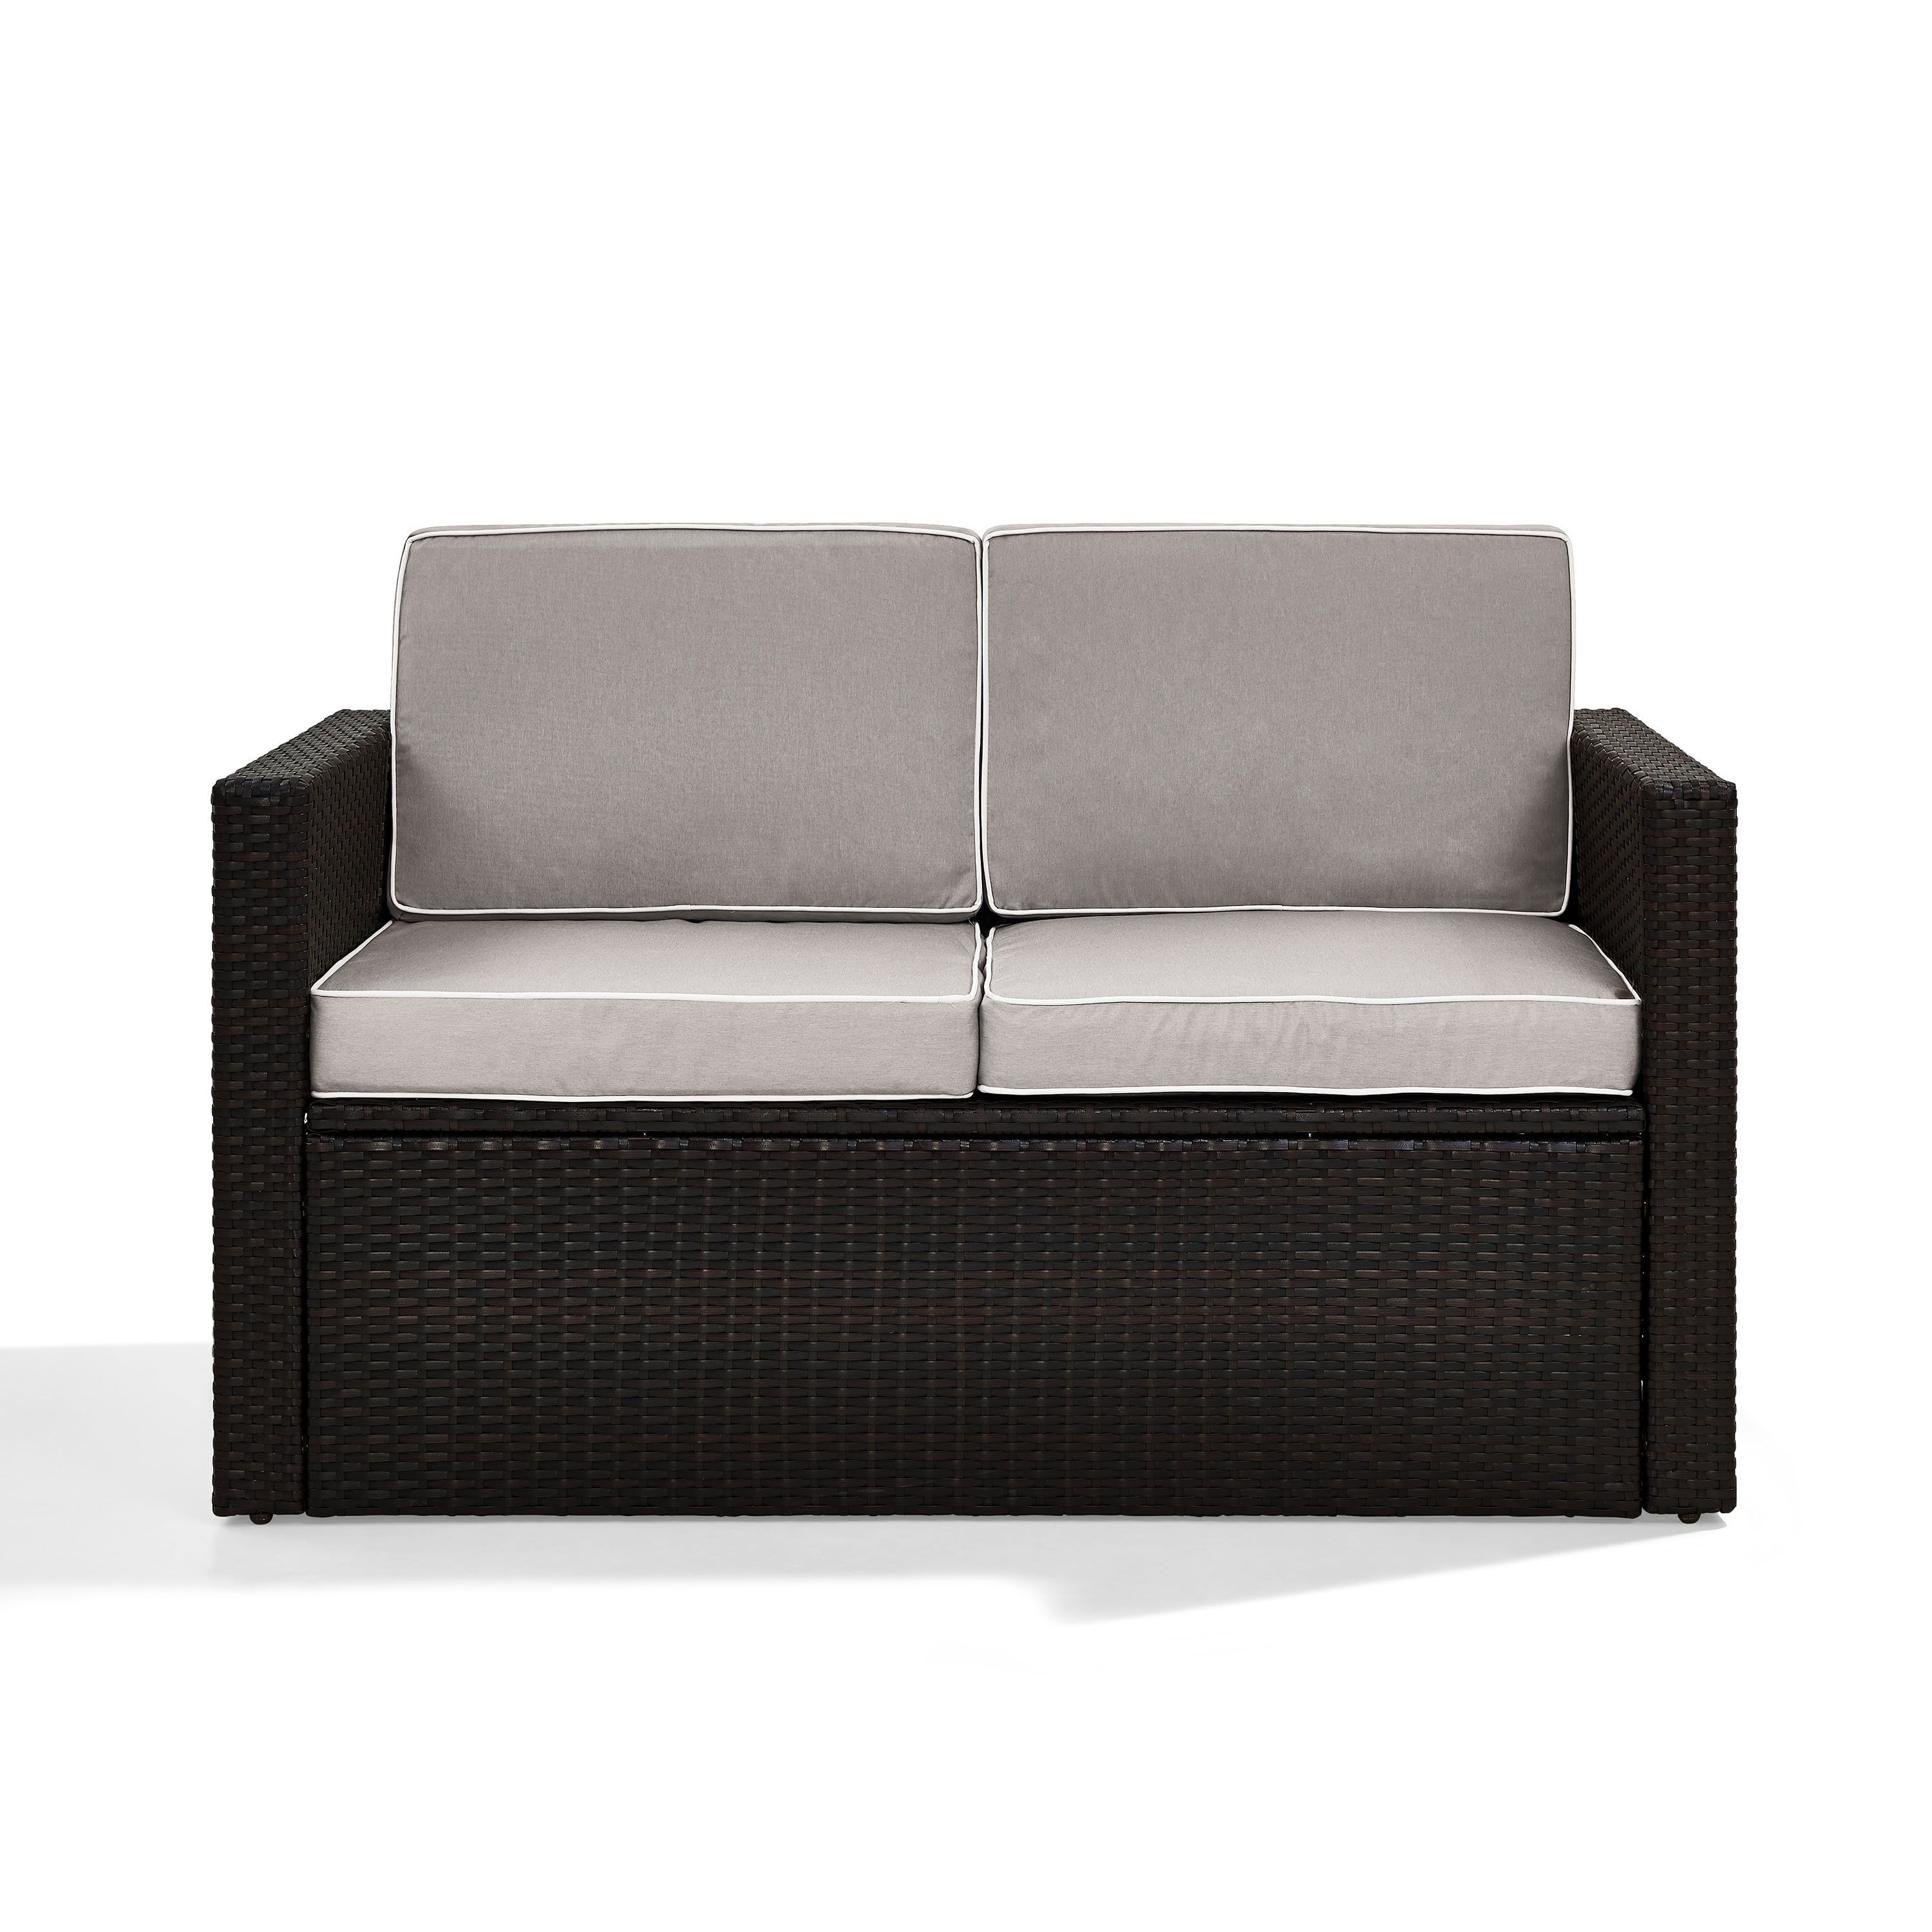 Belton Loveseat With Cushions Pertaining To 2019 Belton Loveseats With Cushions (Photo 2 of 25)